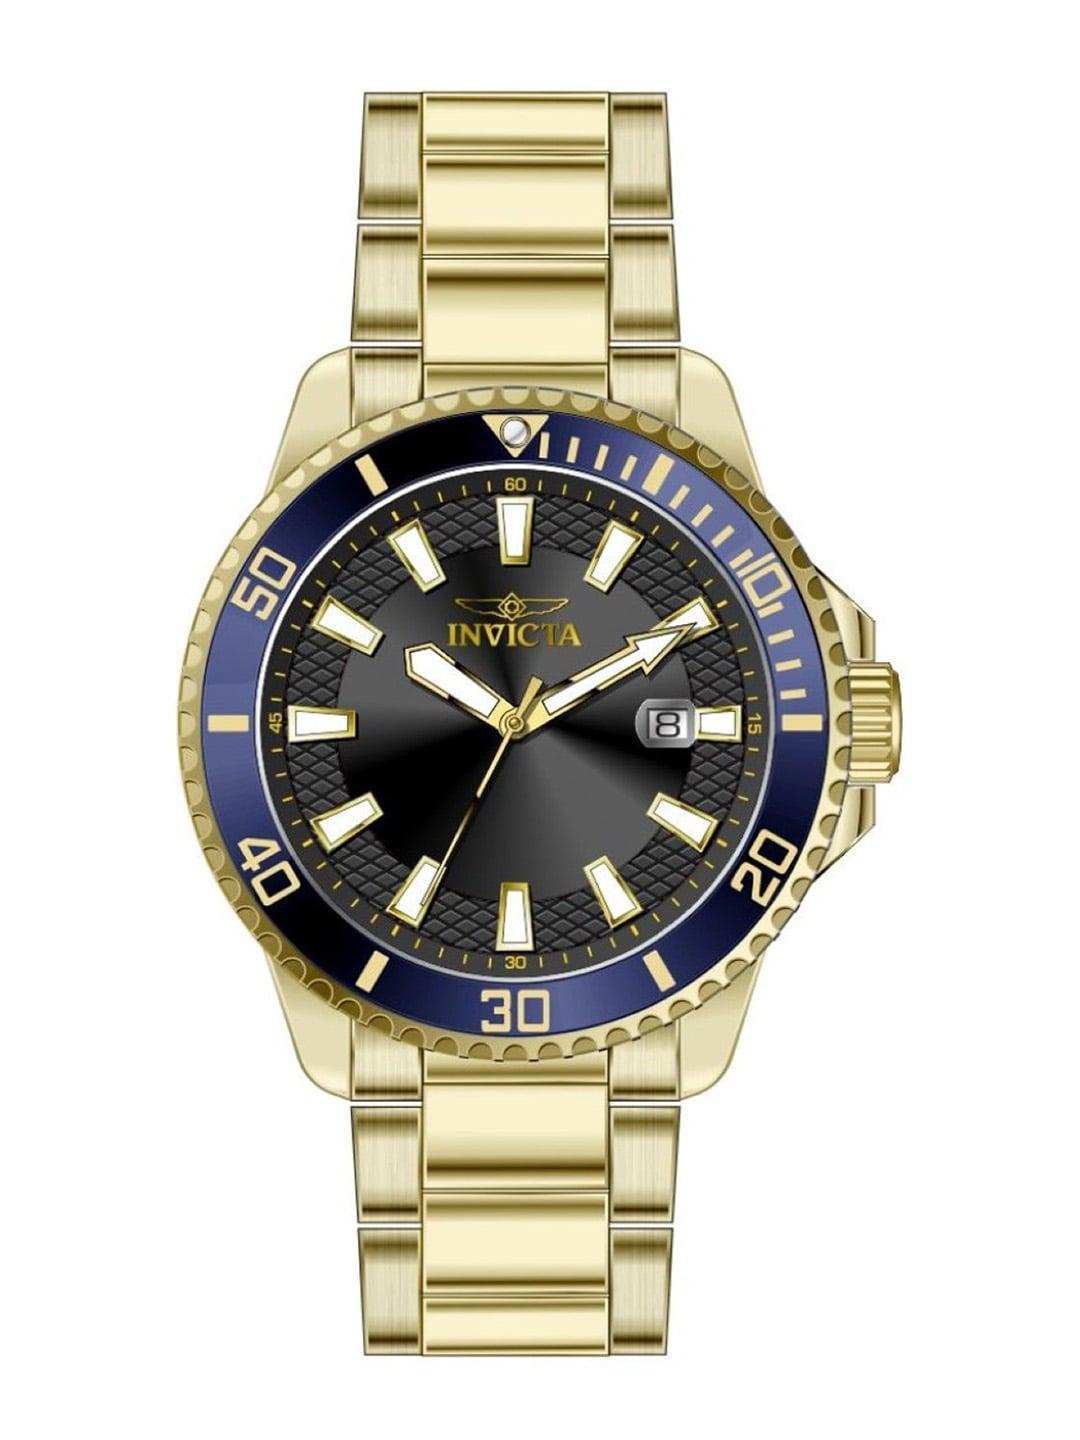 invicta-men-brass-printed-dial-&-stainless-steel-bracelet-style-straps-analogue-watch-46139